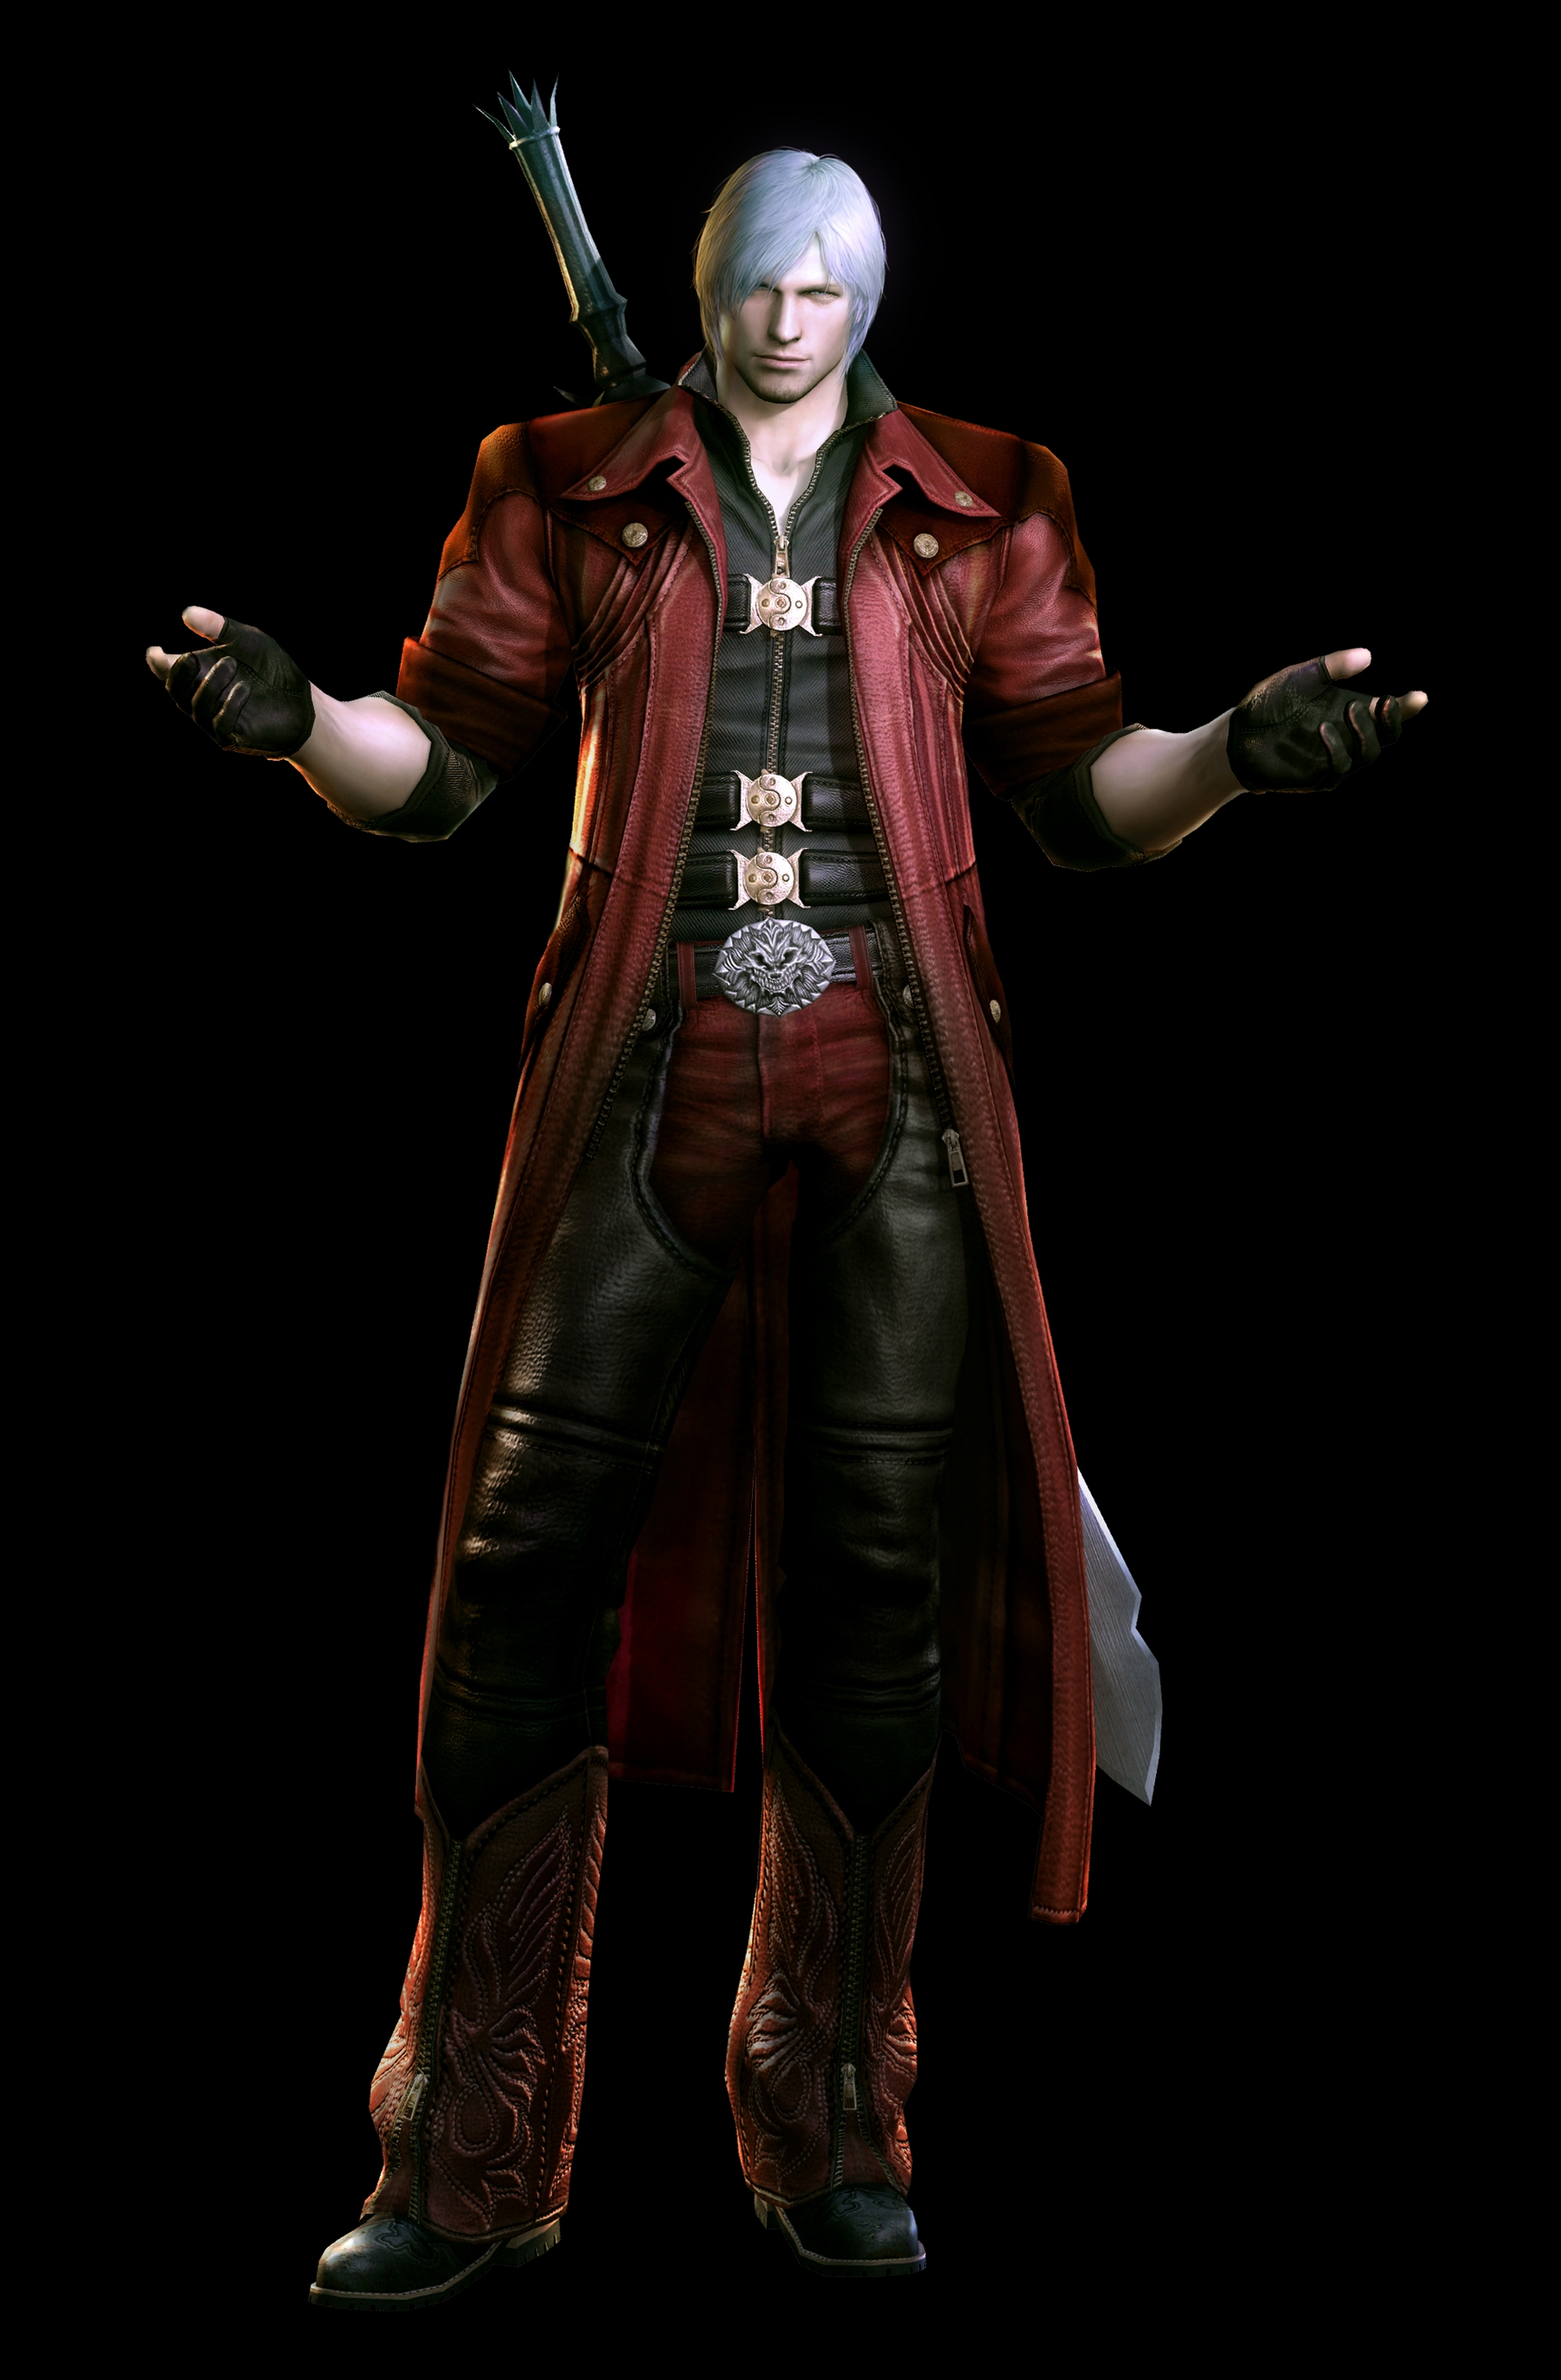 HQ Devil May Cry 4 Wallpapers | File 1173.15Kb